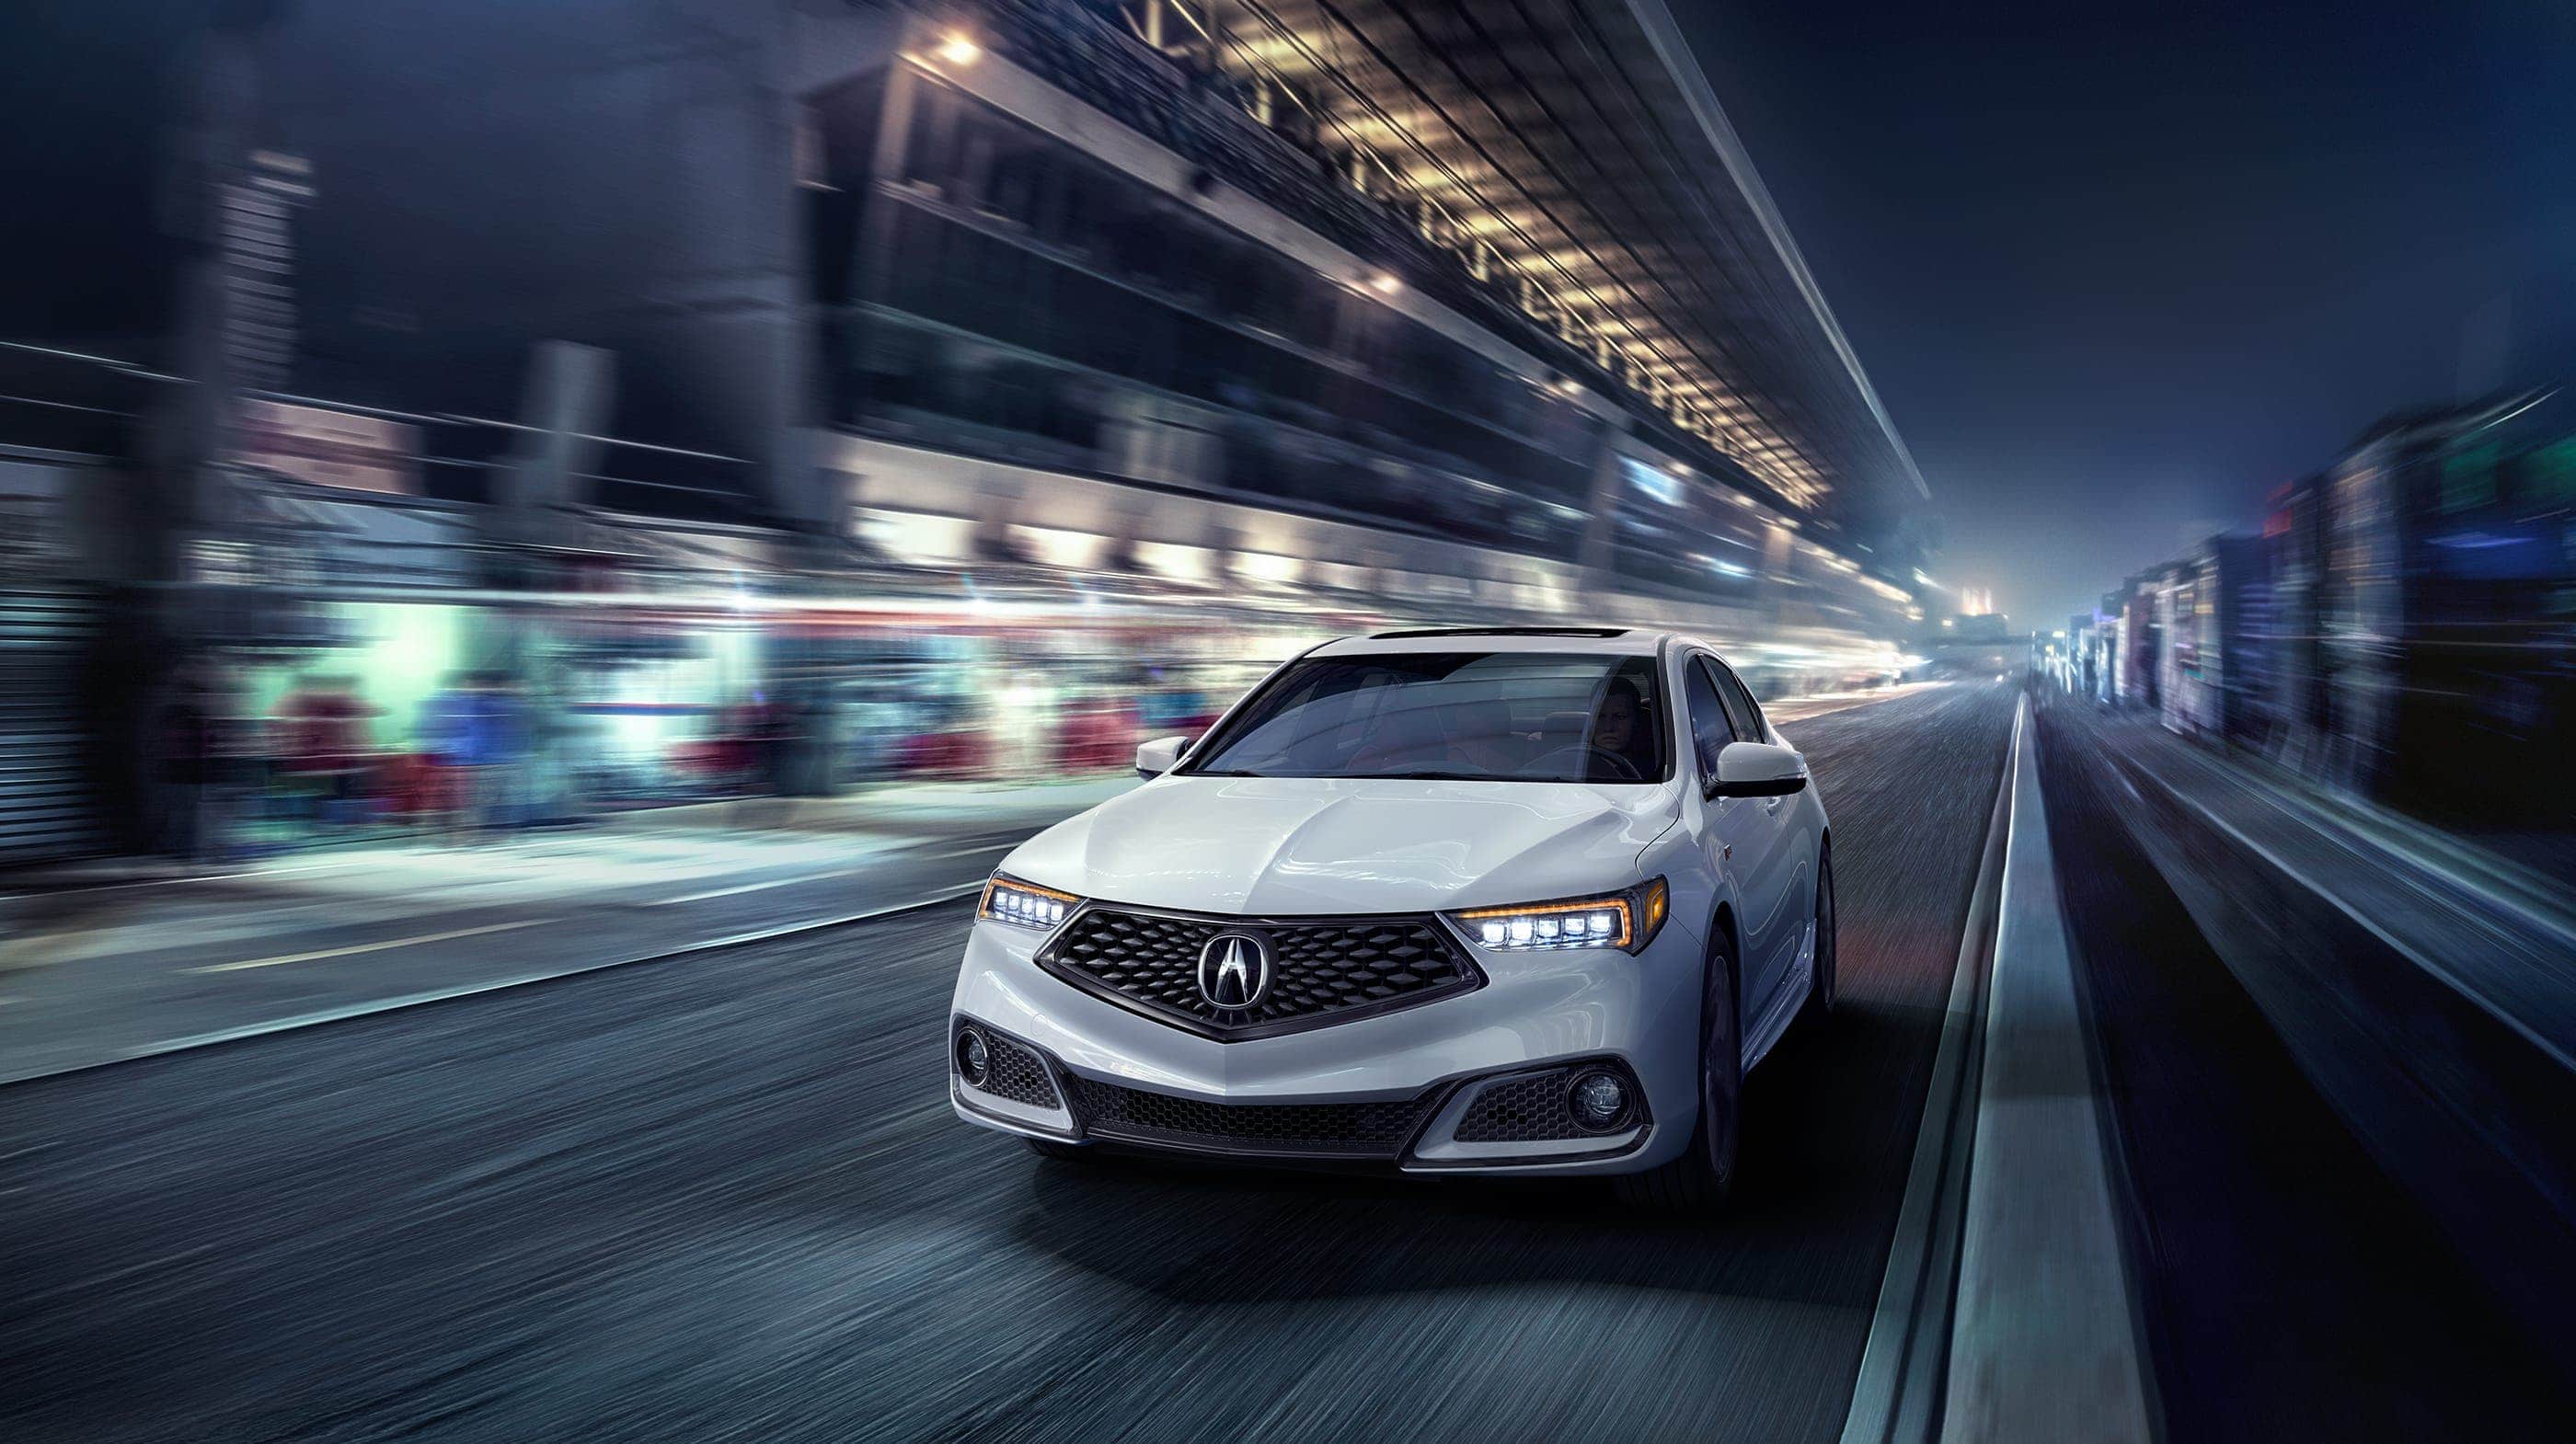 You'll Be Blown Away By The 2018 Acura TLX A SPEC. Connecticut